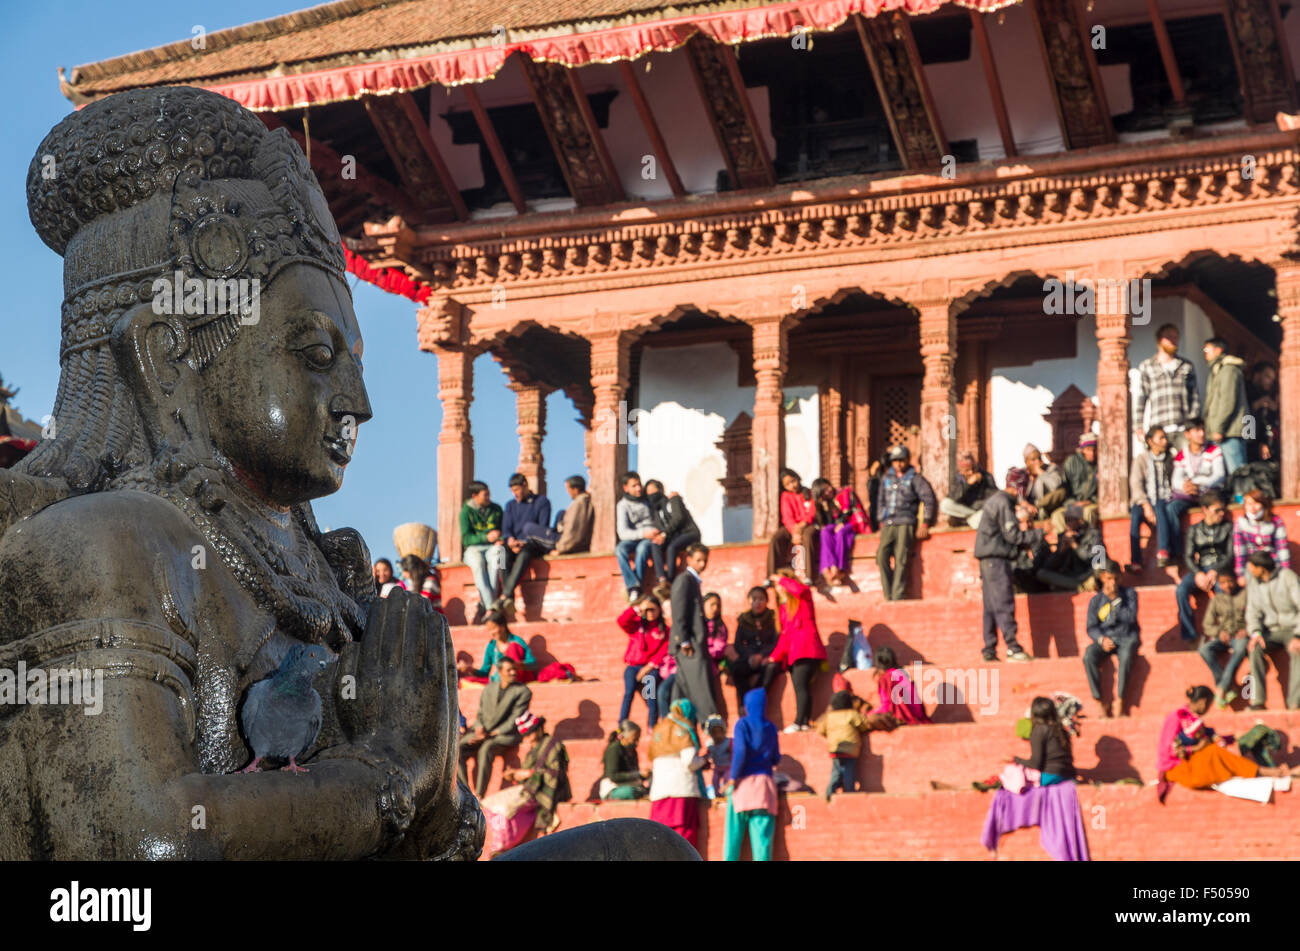 Local people resting on temple steps at Durbar Square, statue of Garuda in foreground Stock Photo